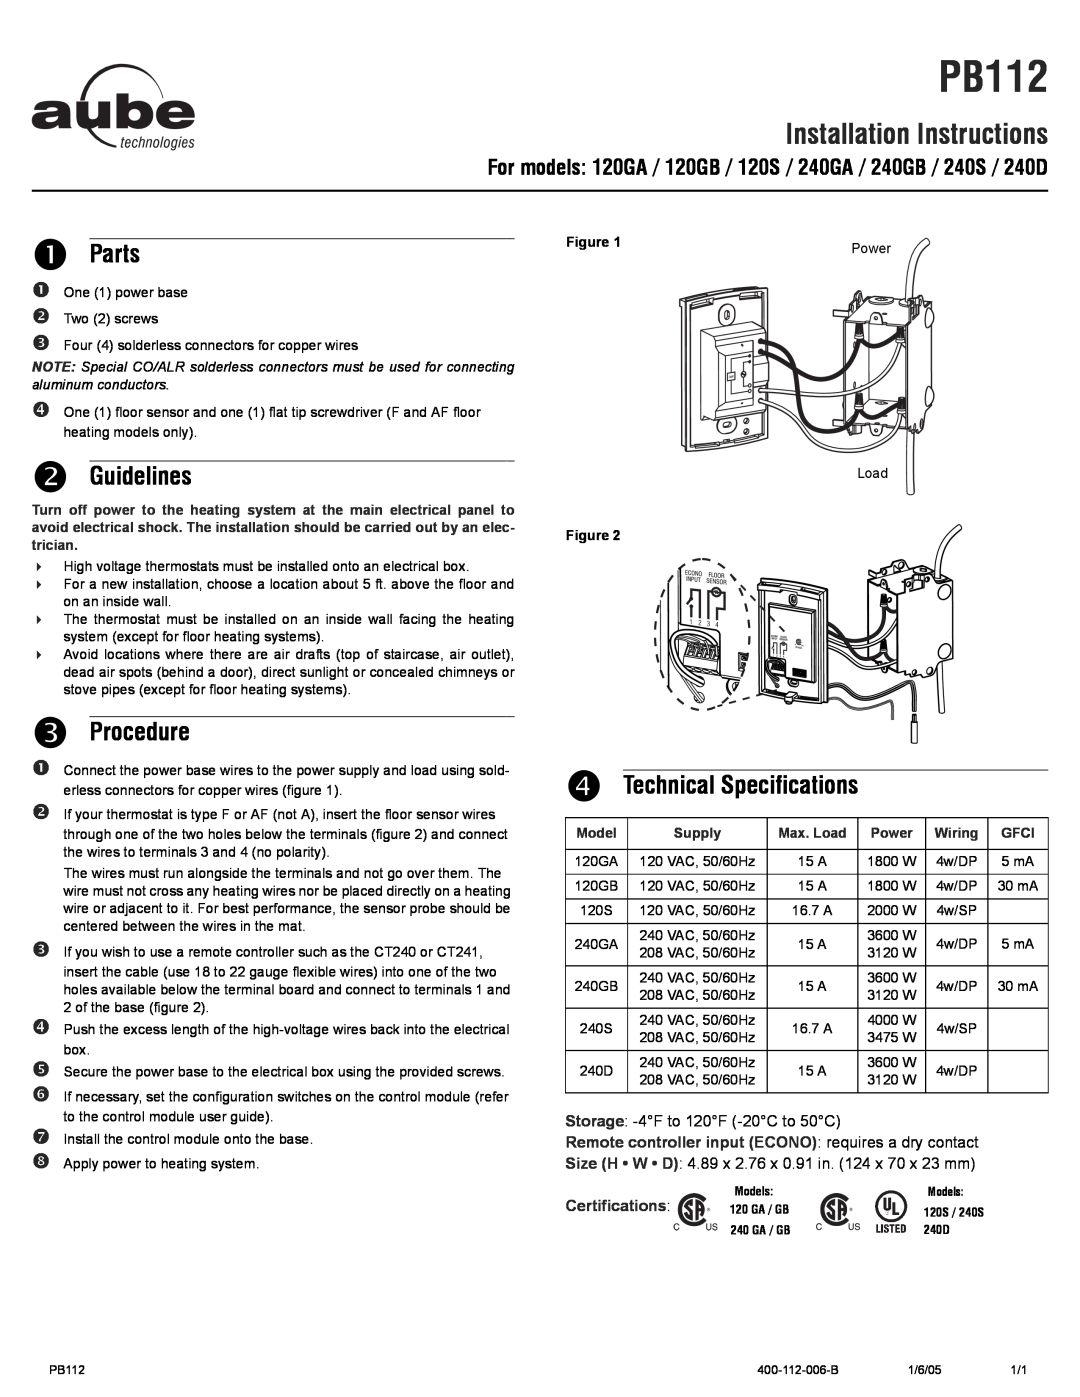 Aube Technologies TH115 Installation Instructions, Remote controller input ECONO requires a dry contact, Certifications 